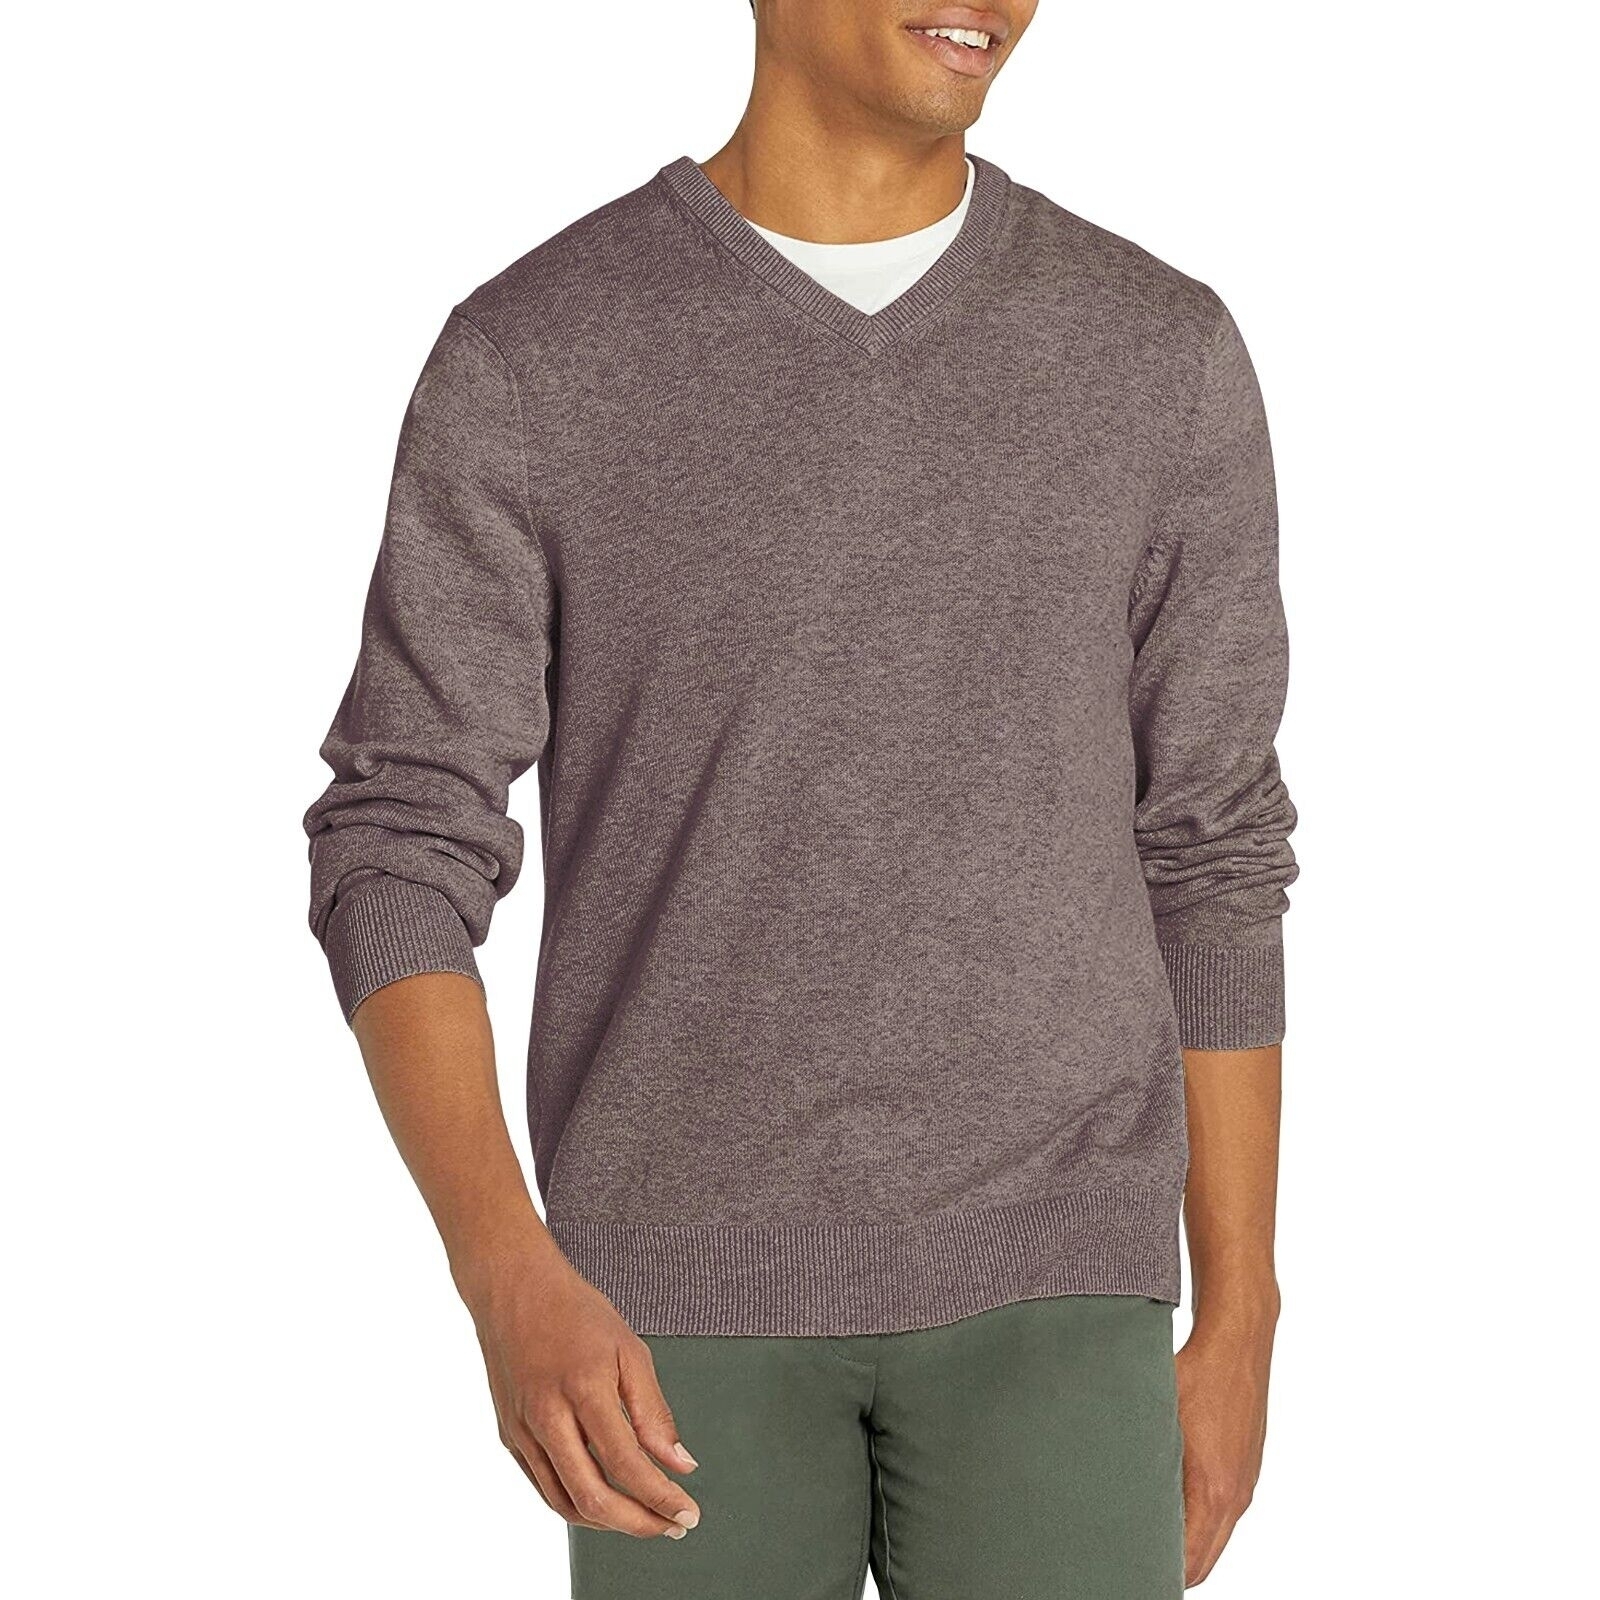 Men's Casual Ultra-Soft Slim Fit Warm Knit Pullover V-Neck Sweater For Winter - Brown, Large